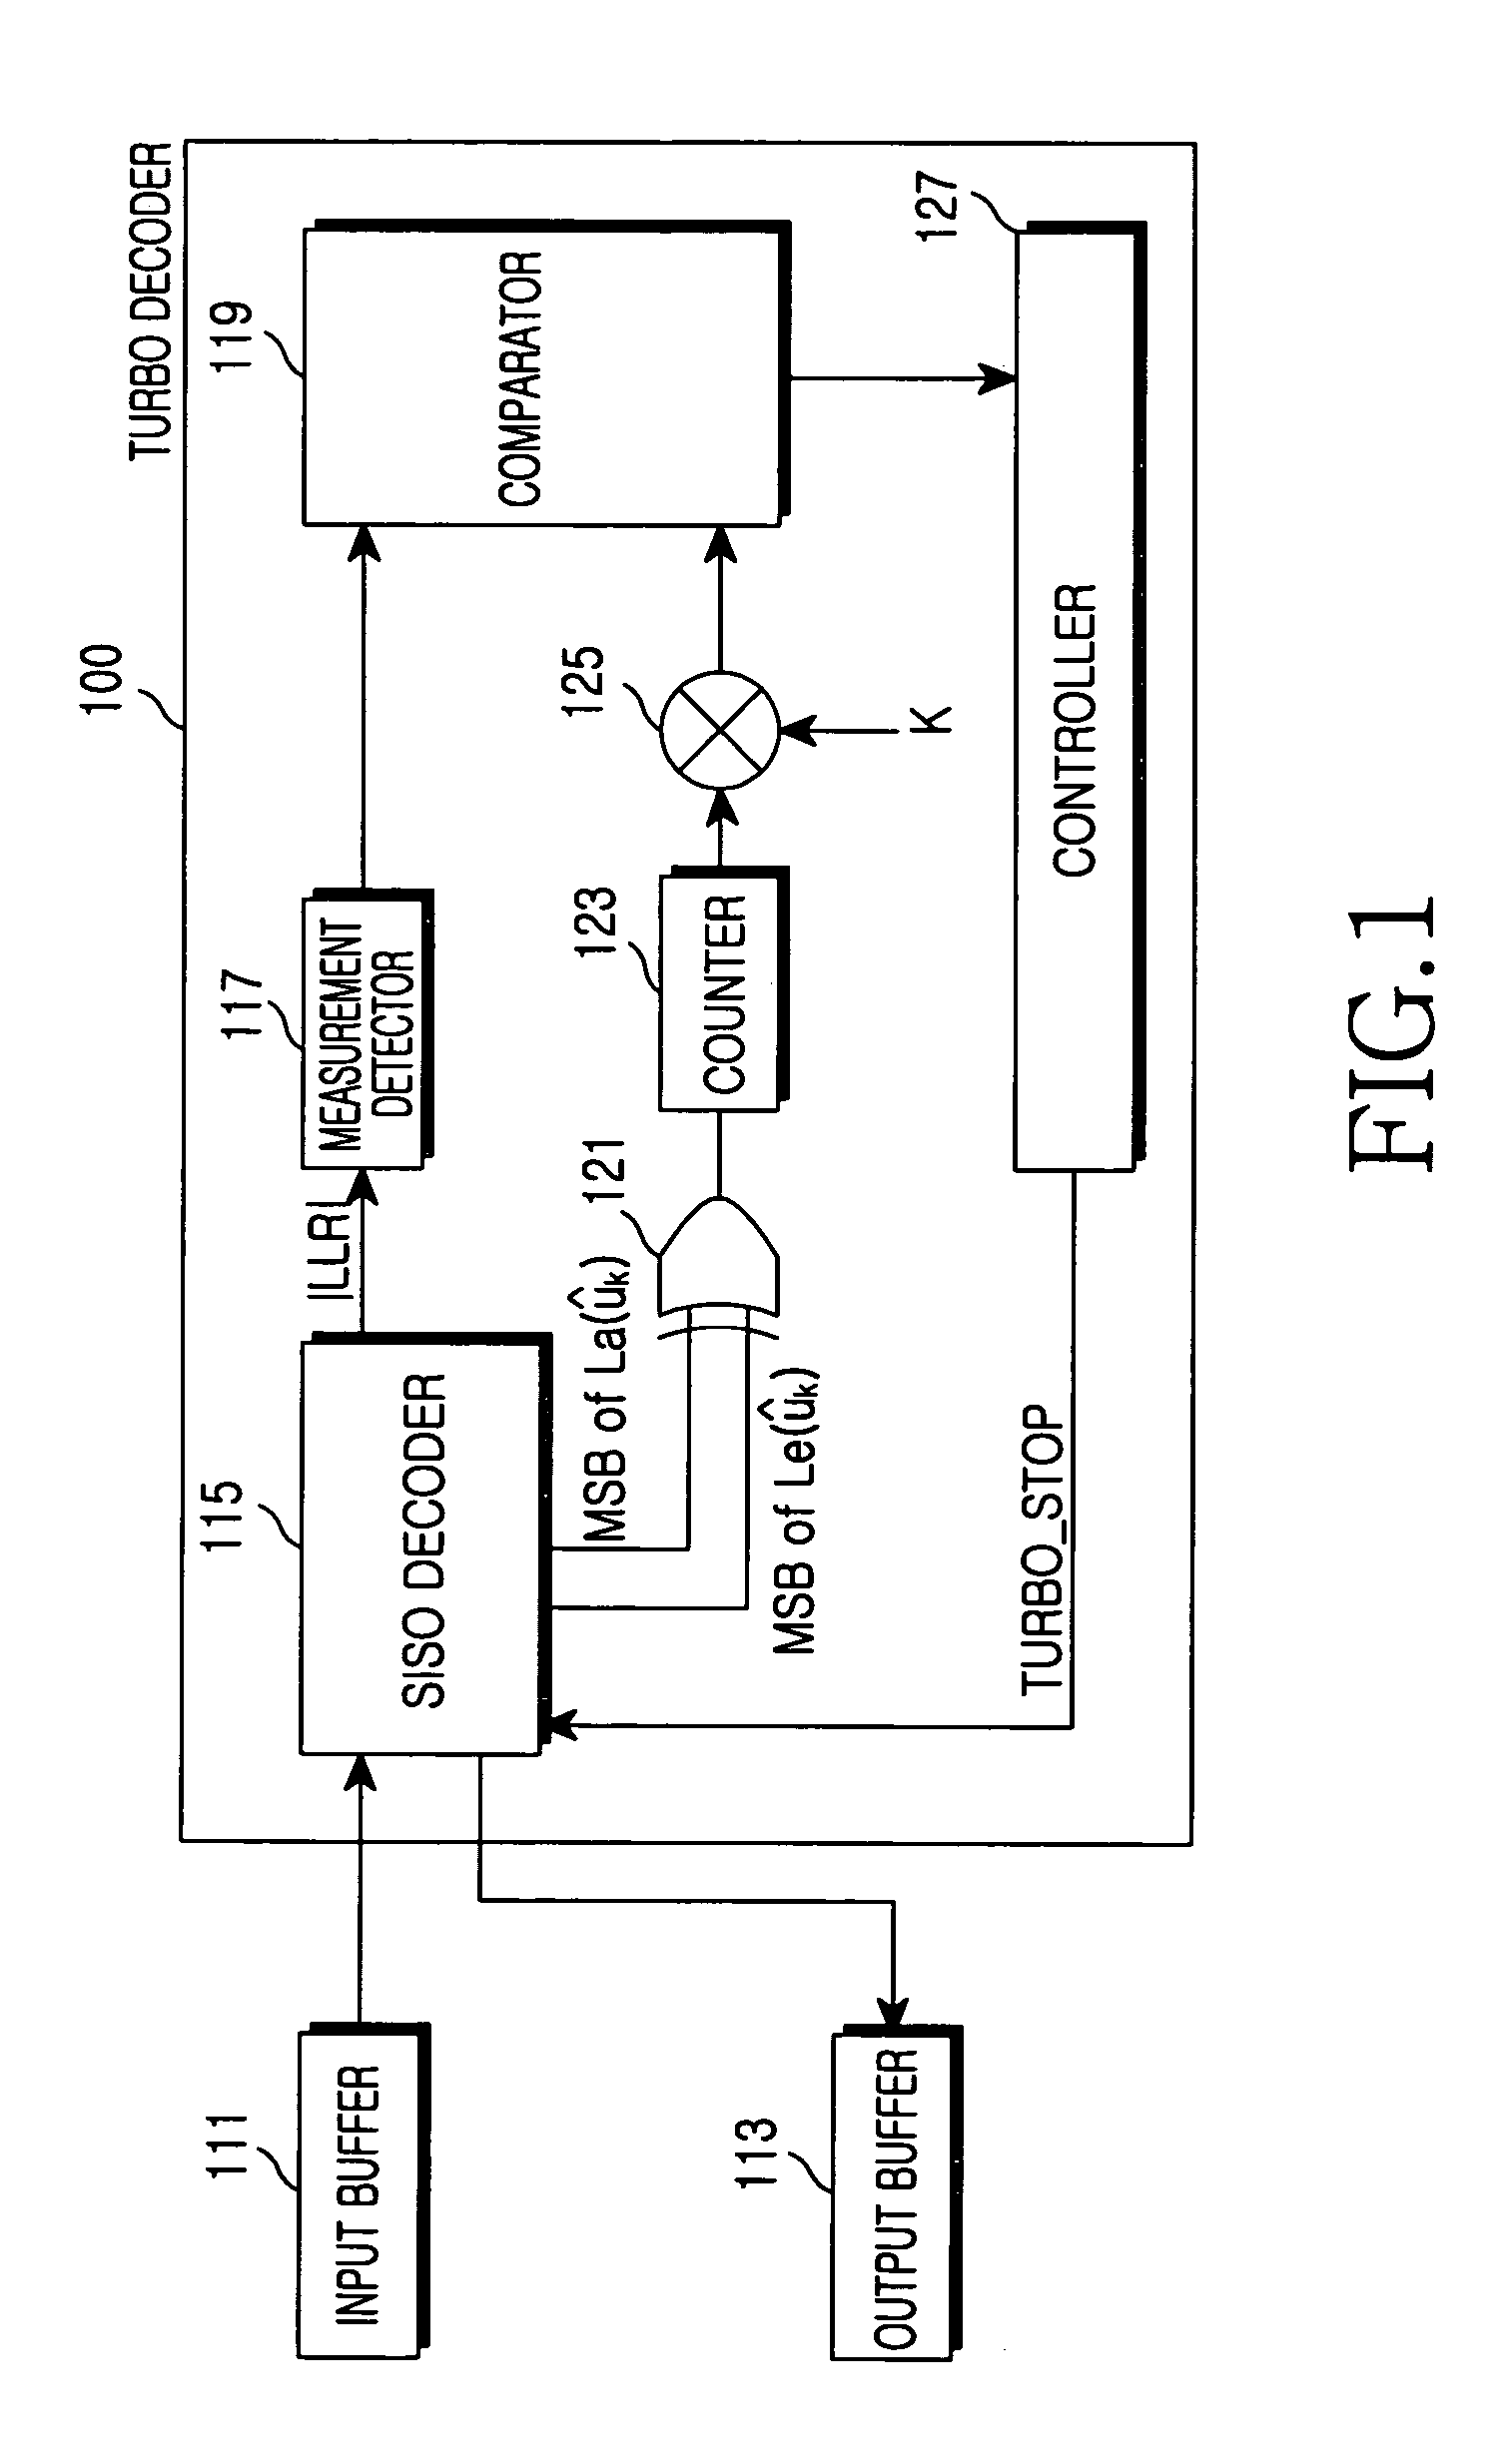 Apparatus and method for error correction in a CDMA mobile communication system